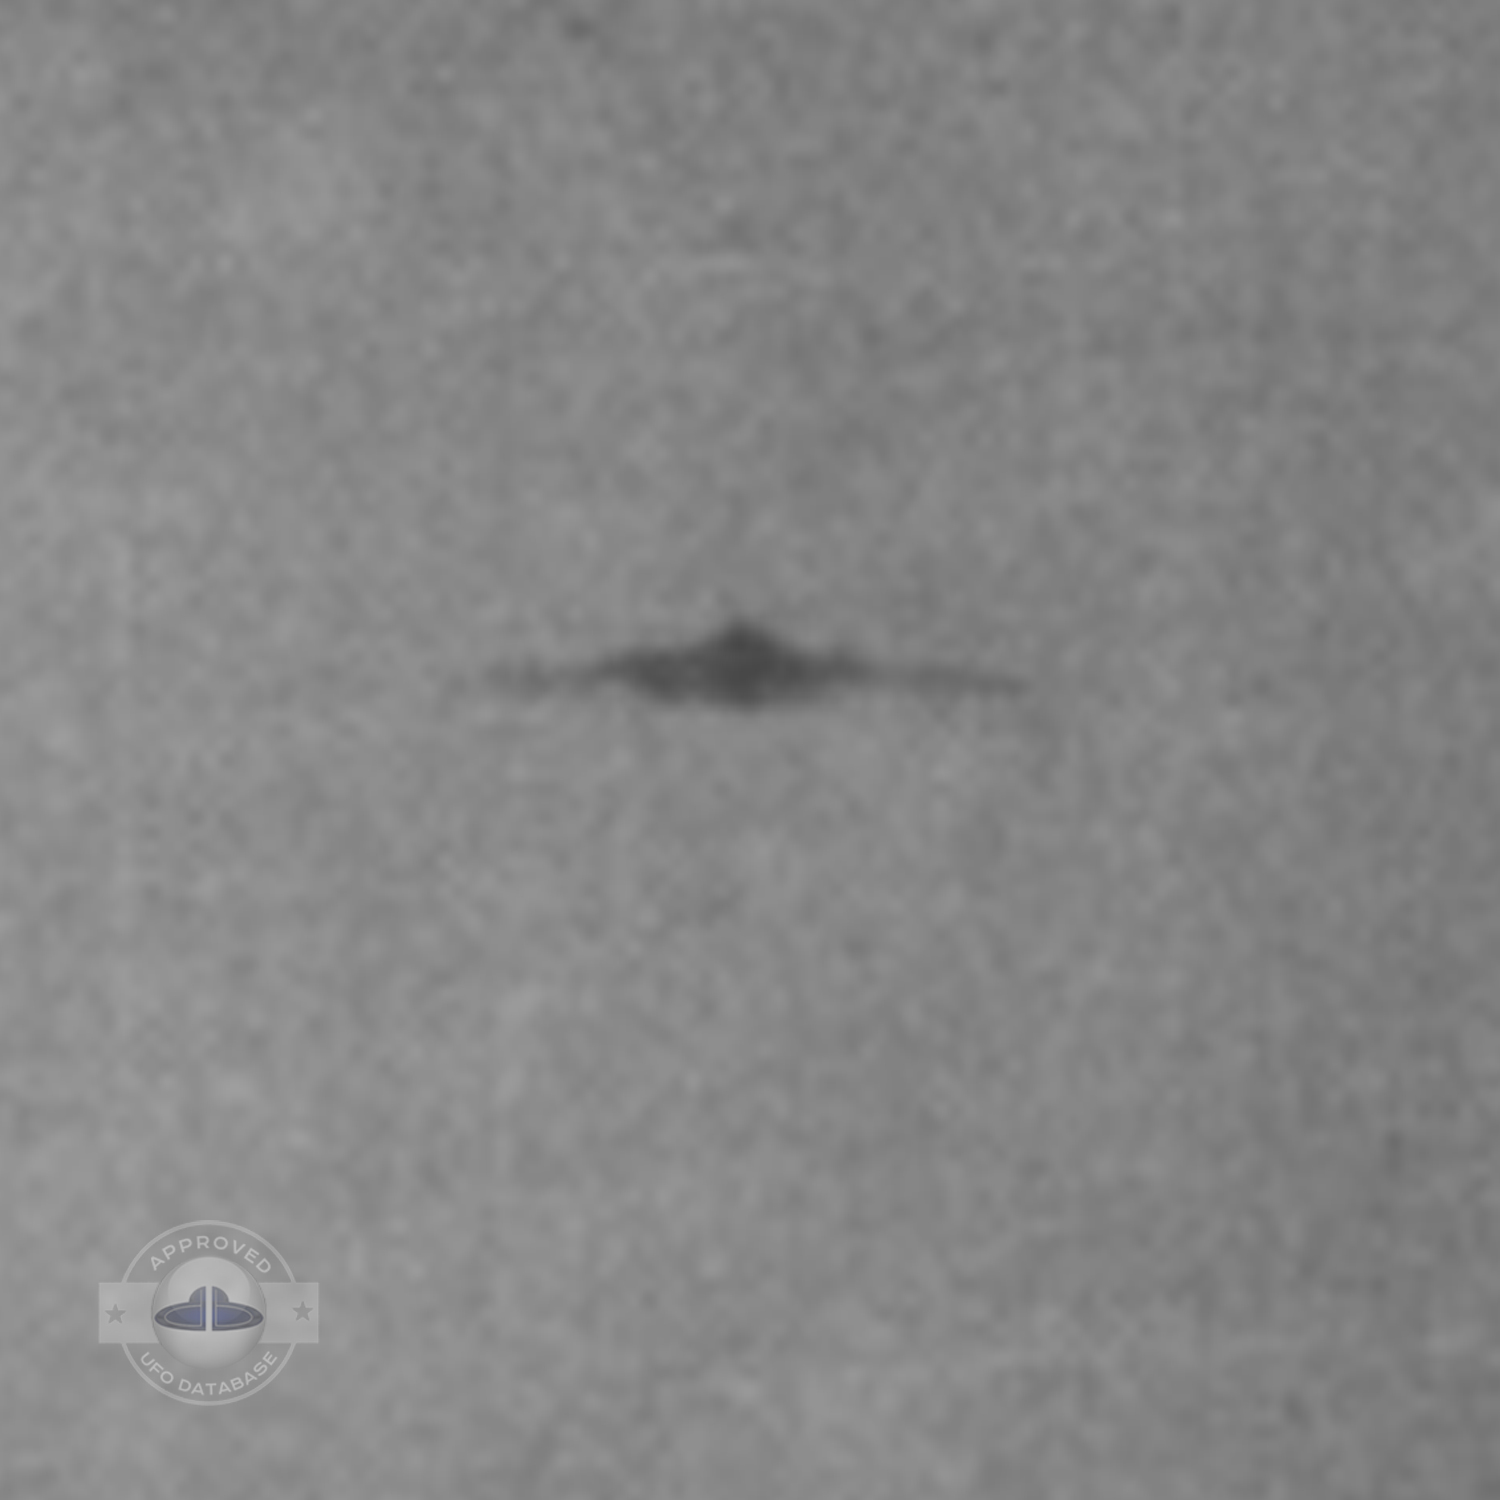 UFO picture considered by A.P.R.O | one of the best ufo picture 1952 UFO Picture #122-6